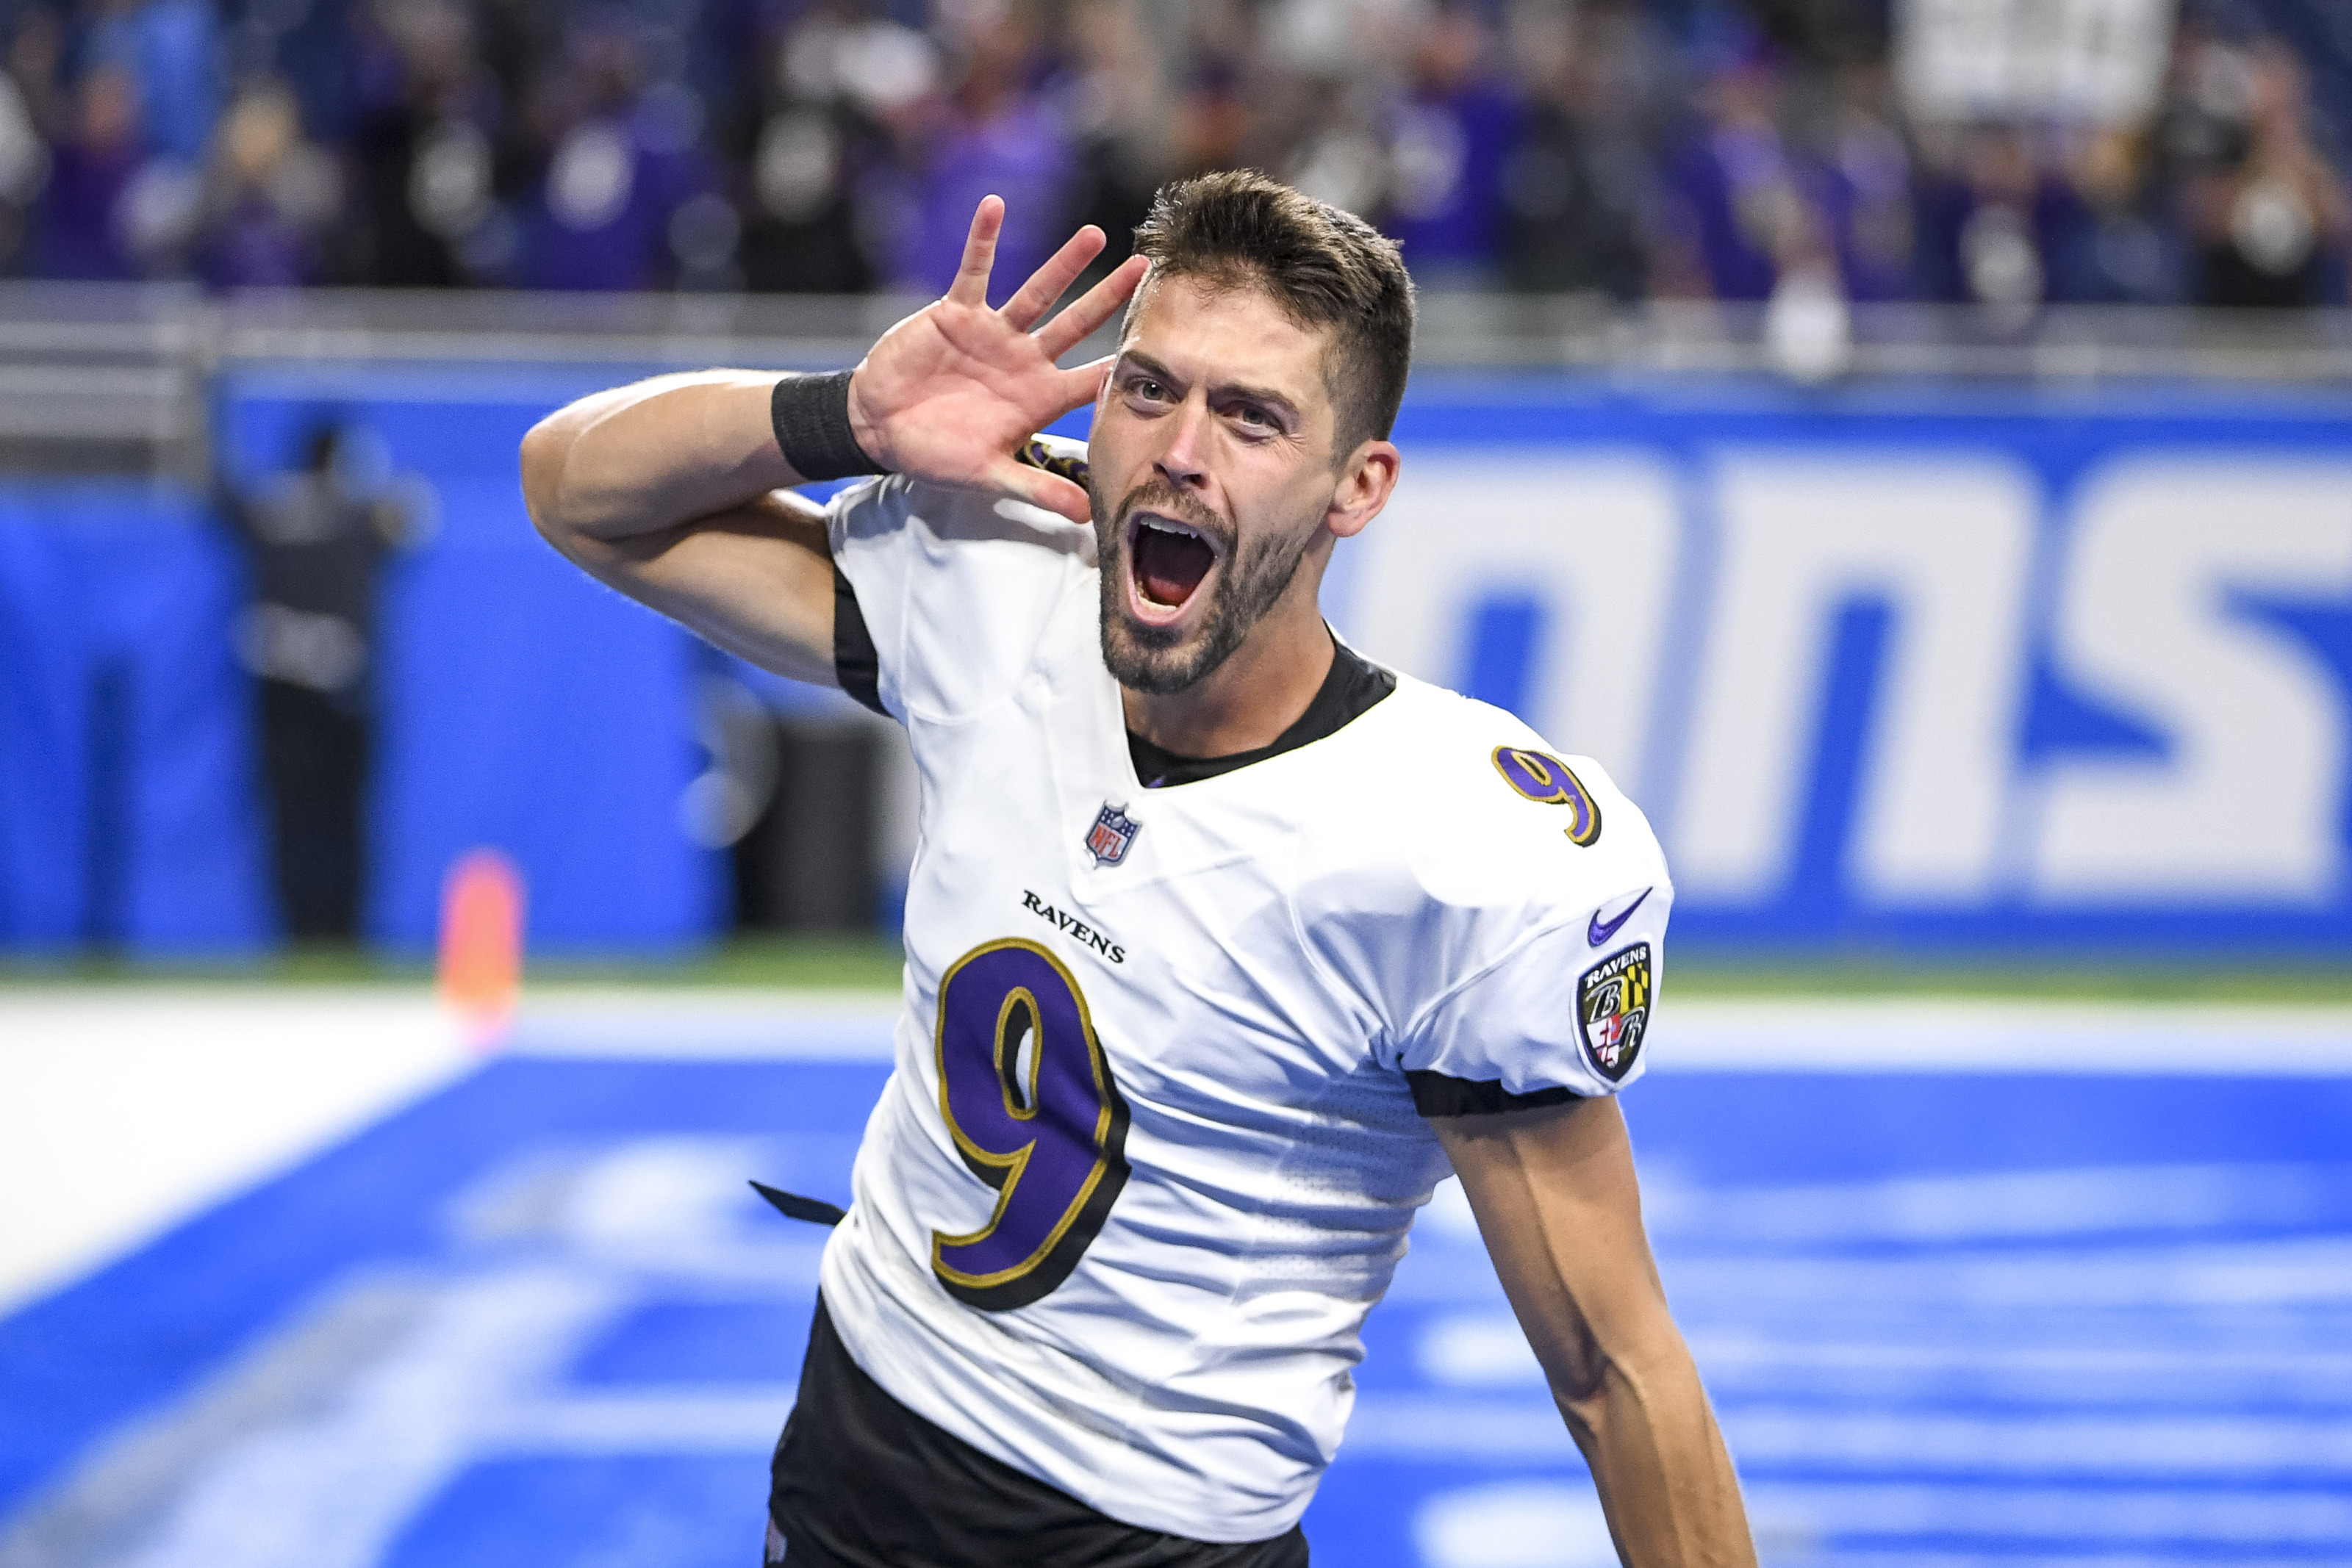 Madden 22: Justin Tucker joins the 99 Club after record-setting field goal